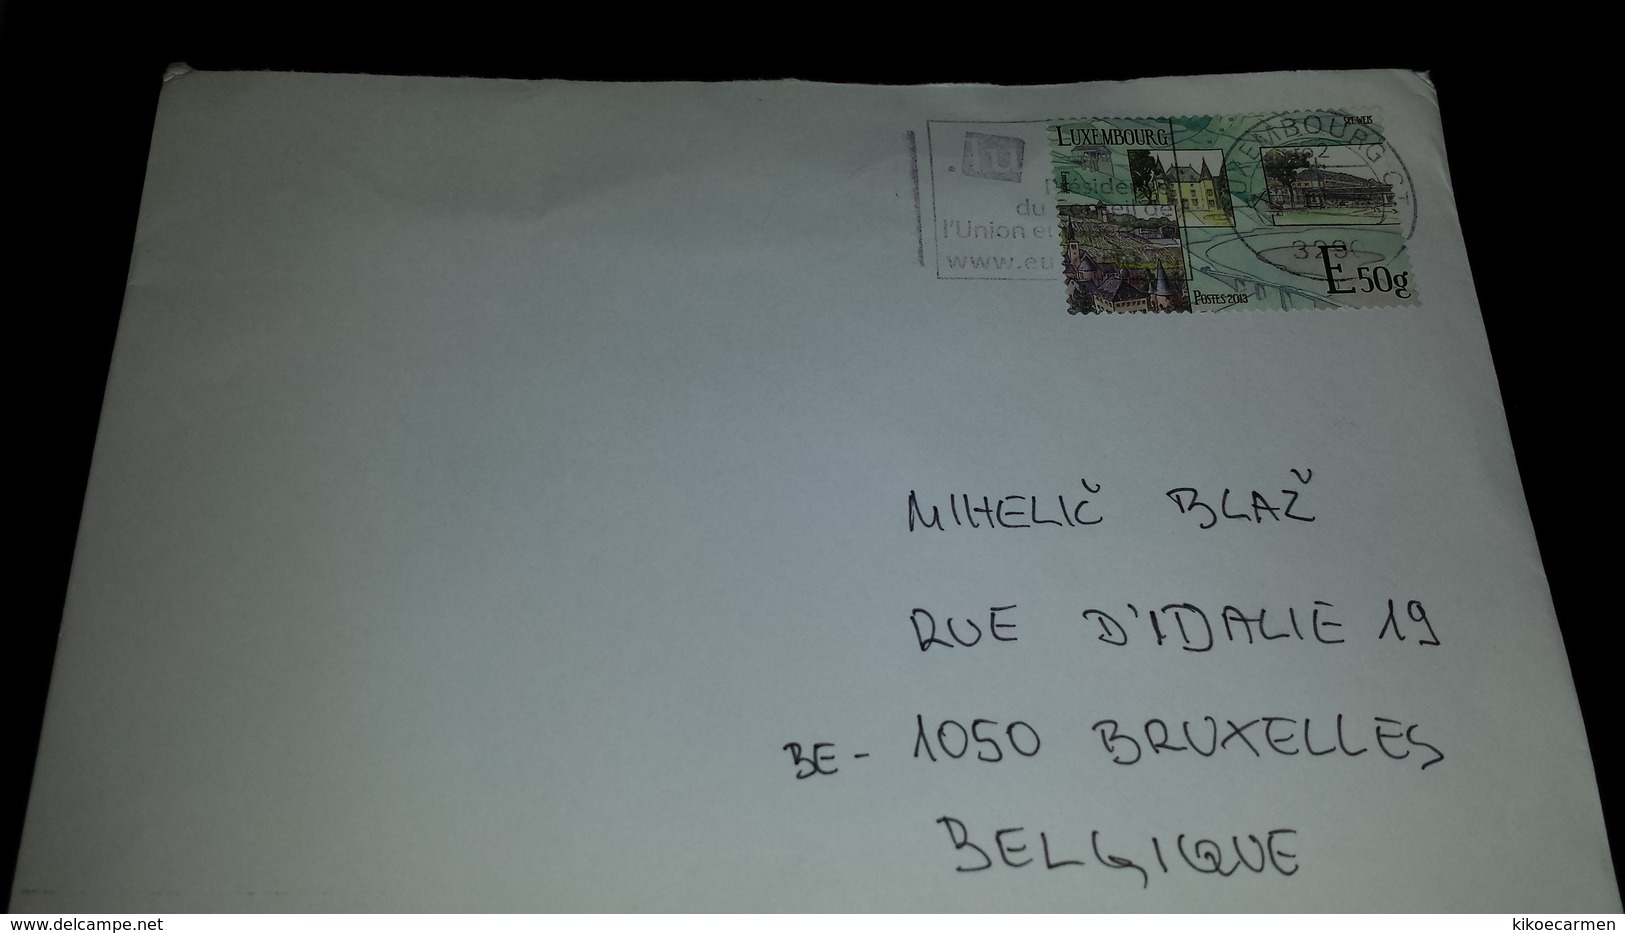 Isolated LUXEMBOURG 2013 Cancel UNION EUROPEE UE European Union Used Letter Cover Postcard - Covers & Documents